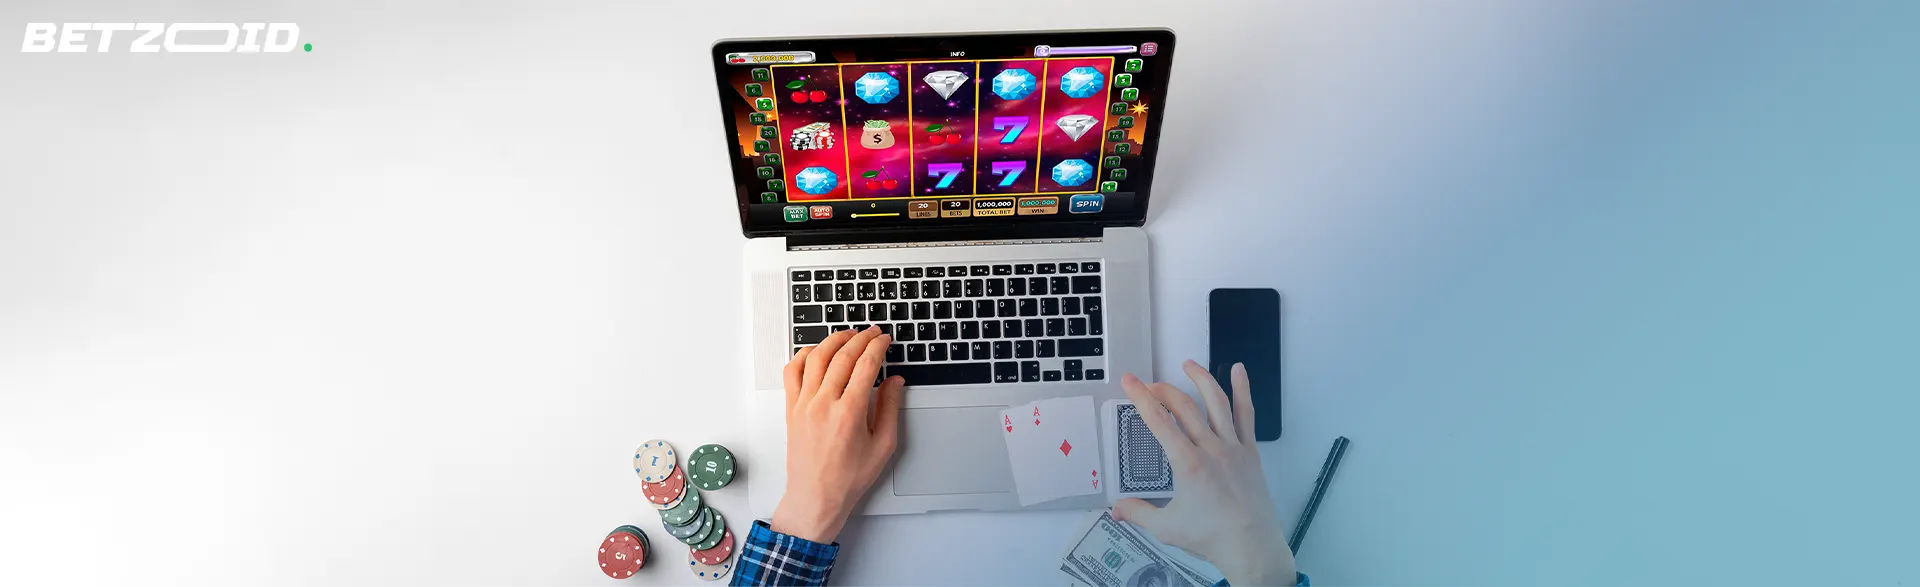 The laptop displays instant play casinos.